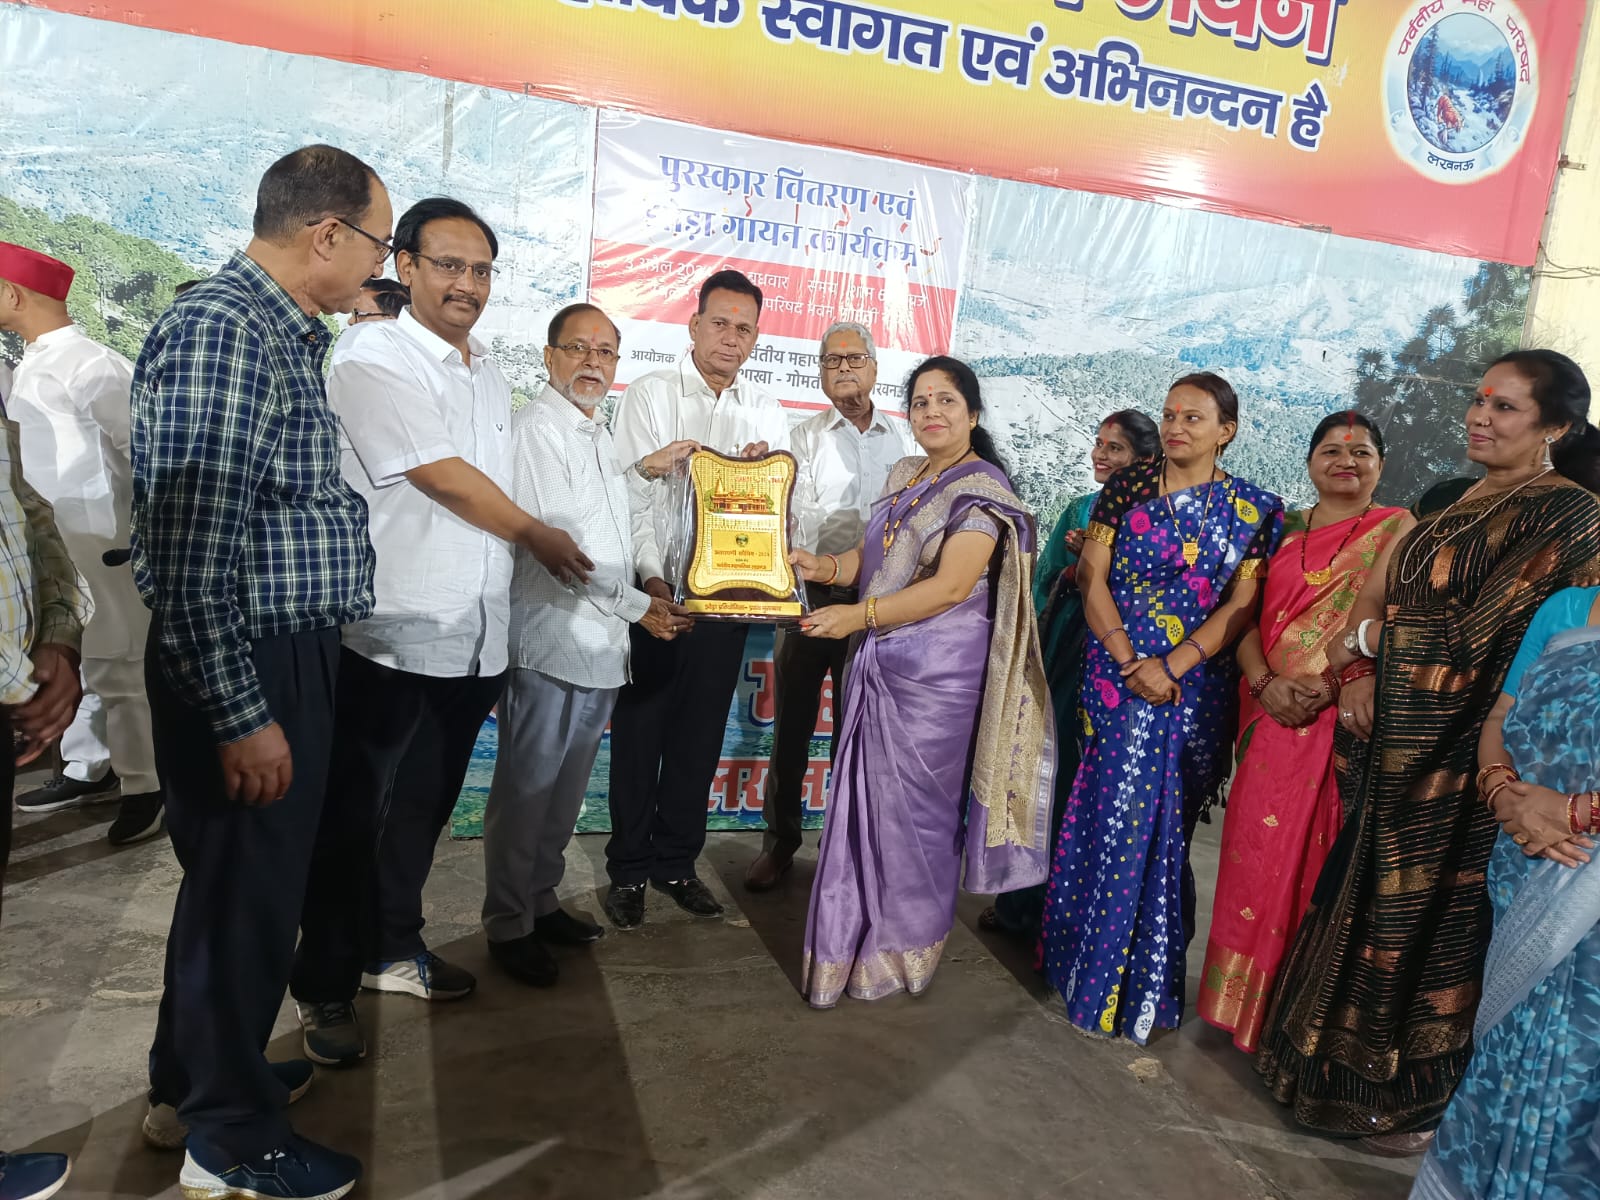 The team of Indira Nagar Extension which got first place in Uttarayani Kauthig-2024 was honored with a trophy.